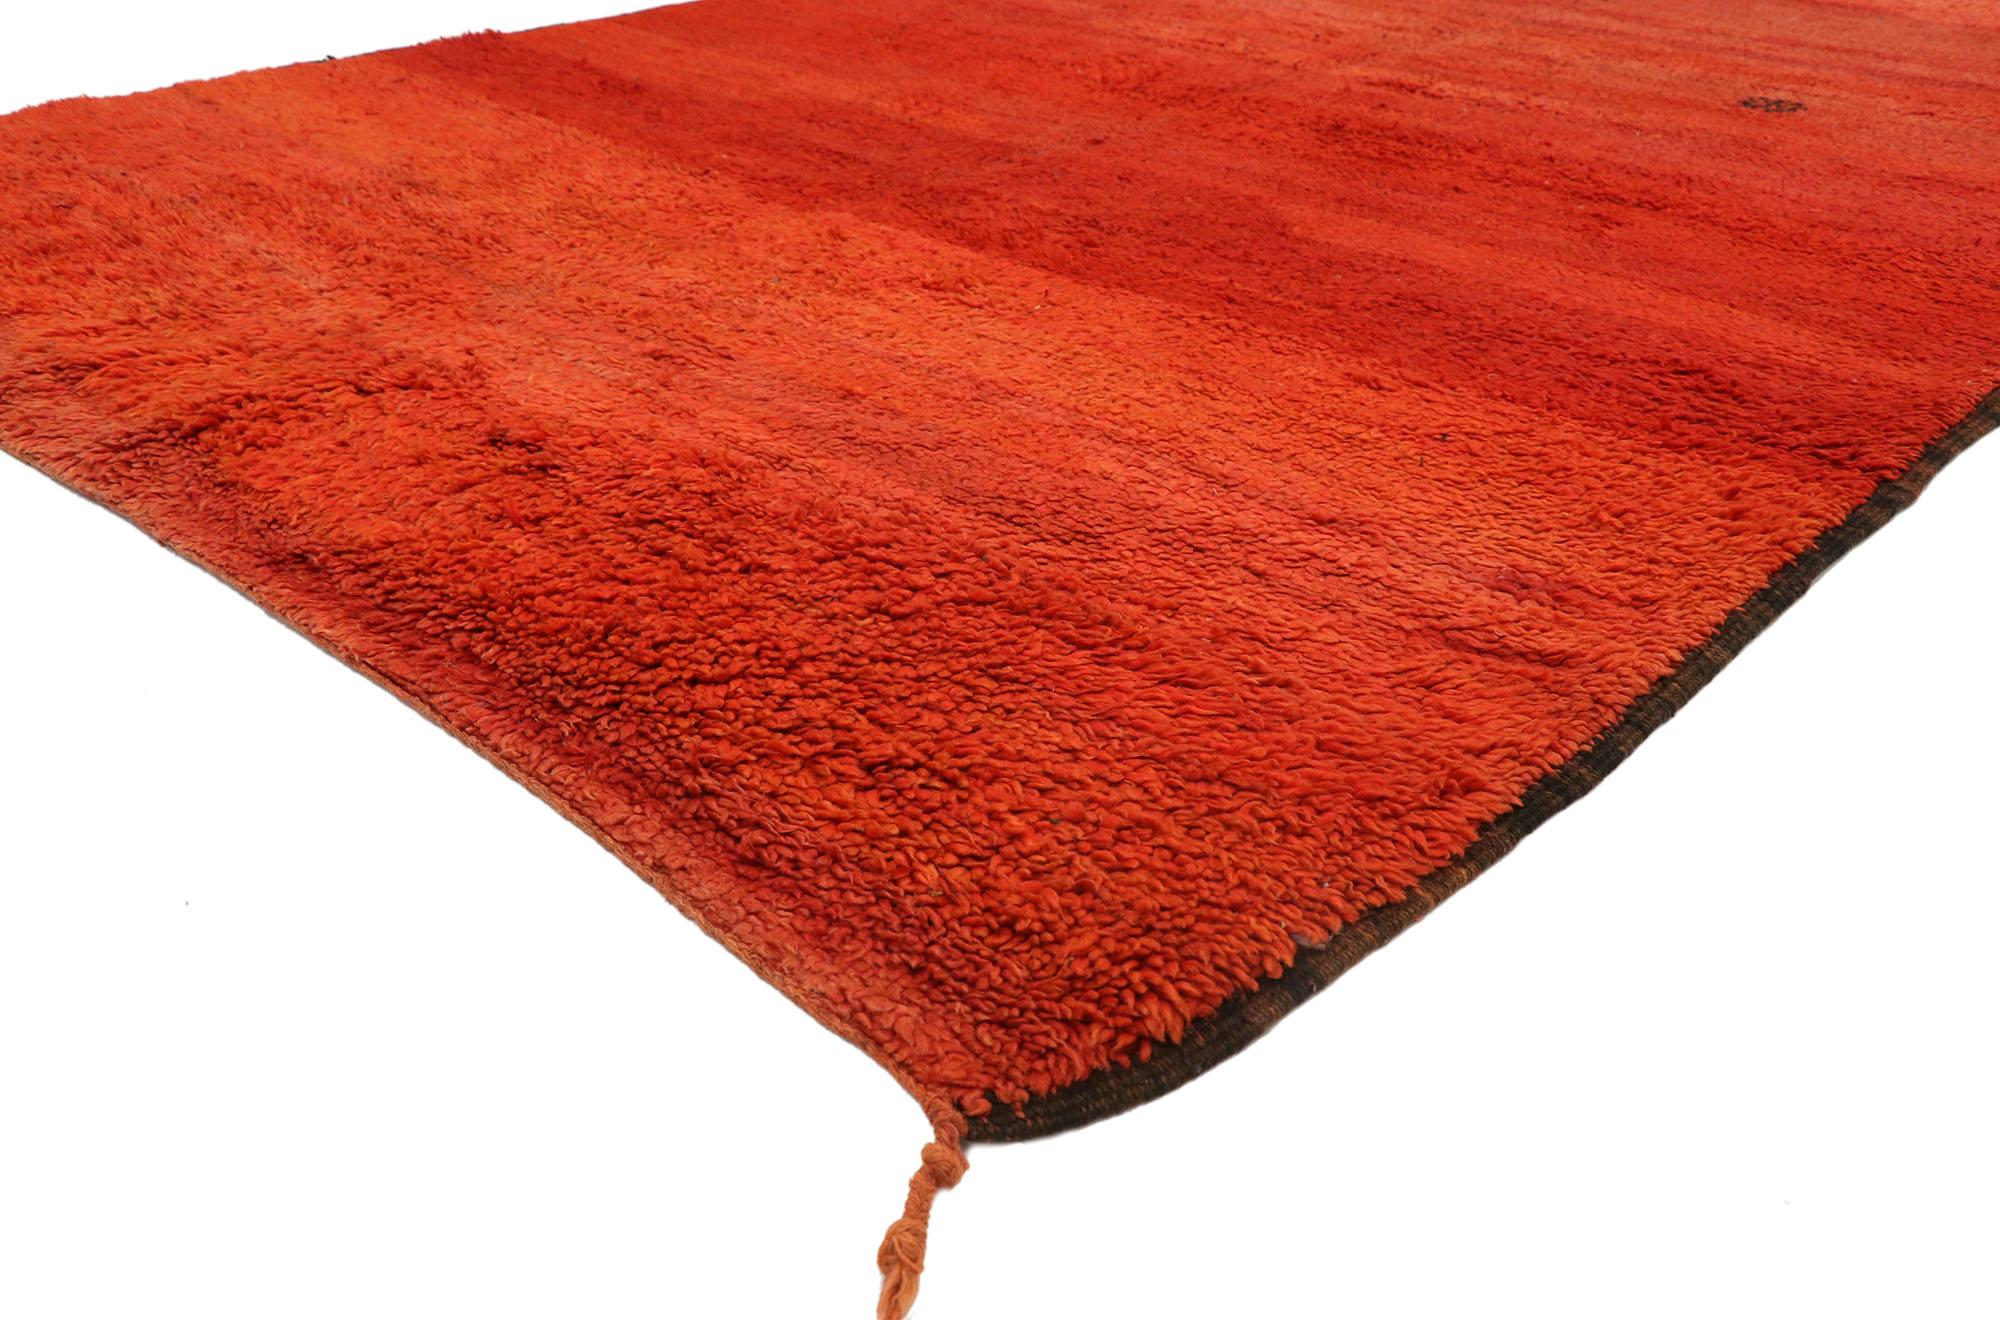 21017 Vintage Red Beni Mrirt Moroccan Rug, 06'11 x 10'08.

This hand-knotted wool vintage Beni Mrirt Moroccan rug—a masterpiece from the Mrirt region in the Middle Atlas Mountains, meticulously crafted by the Beni Mrirt tribe within the expansive